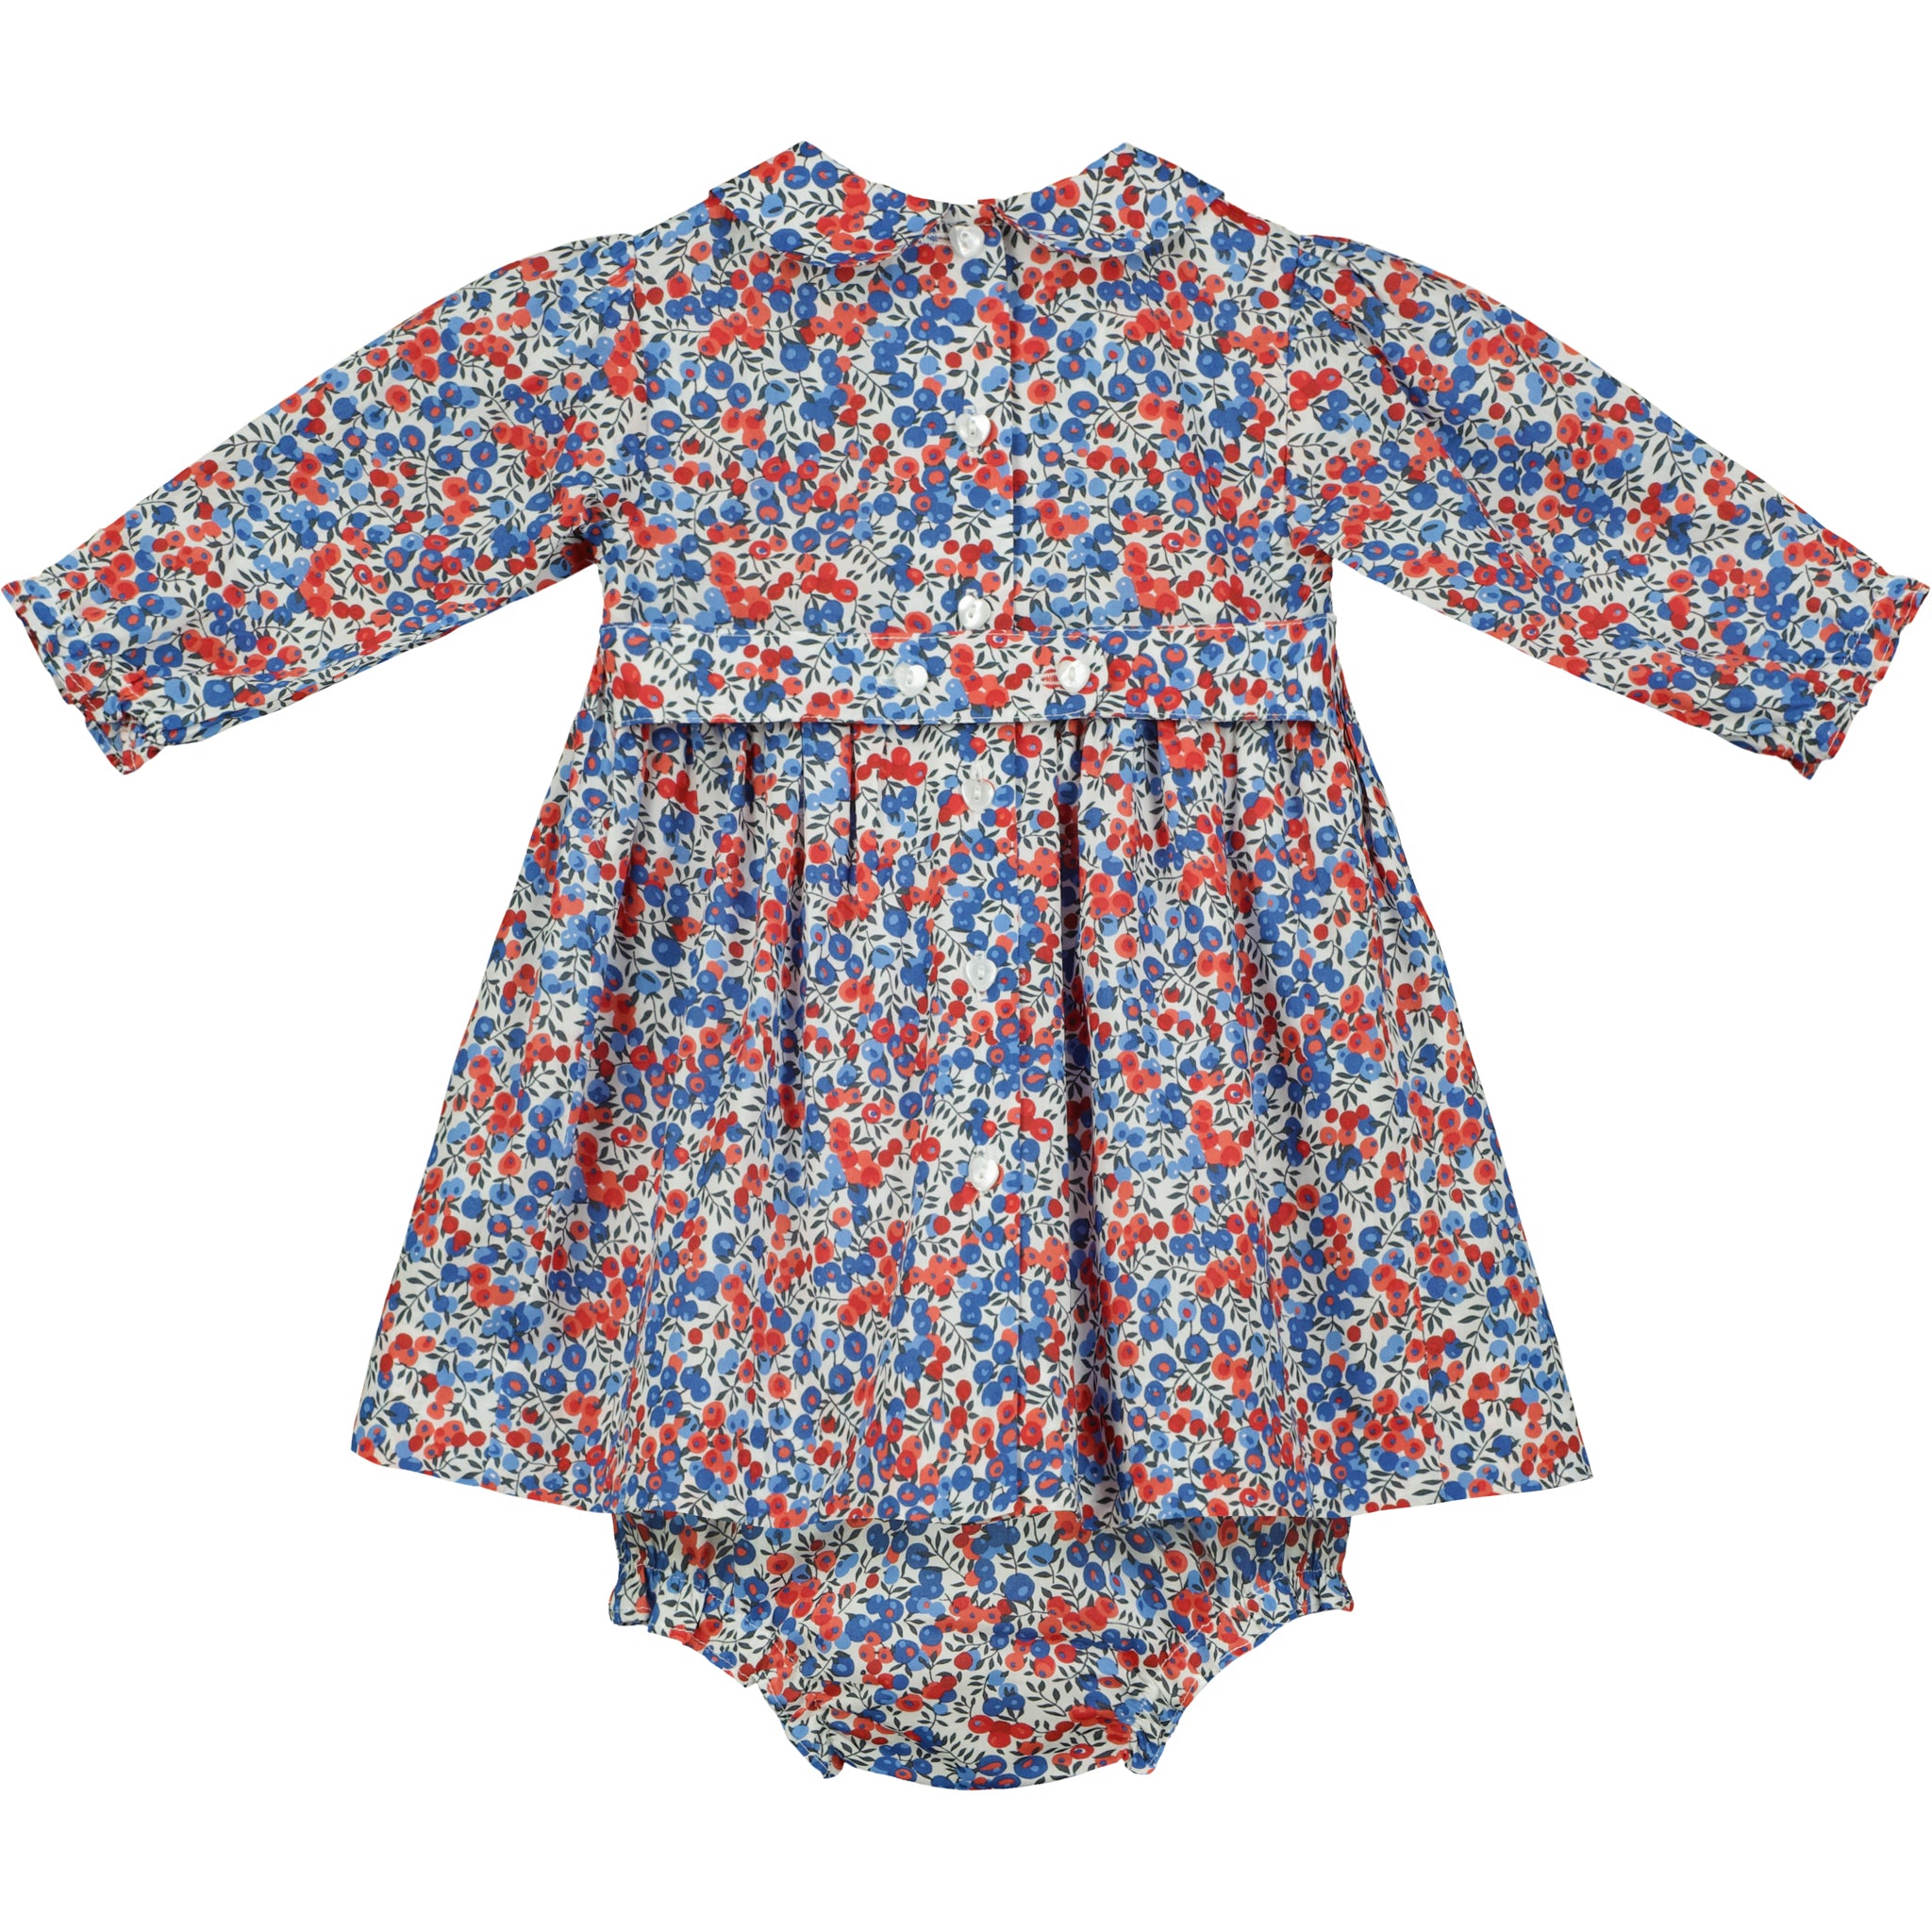  Blue and red Wiltshire Tana Lawn™ Cotton  Liberty print dress with hand-smocking, back